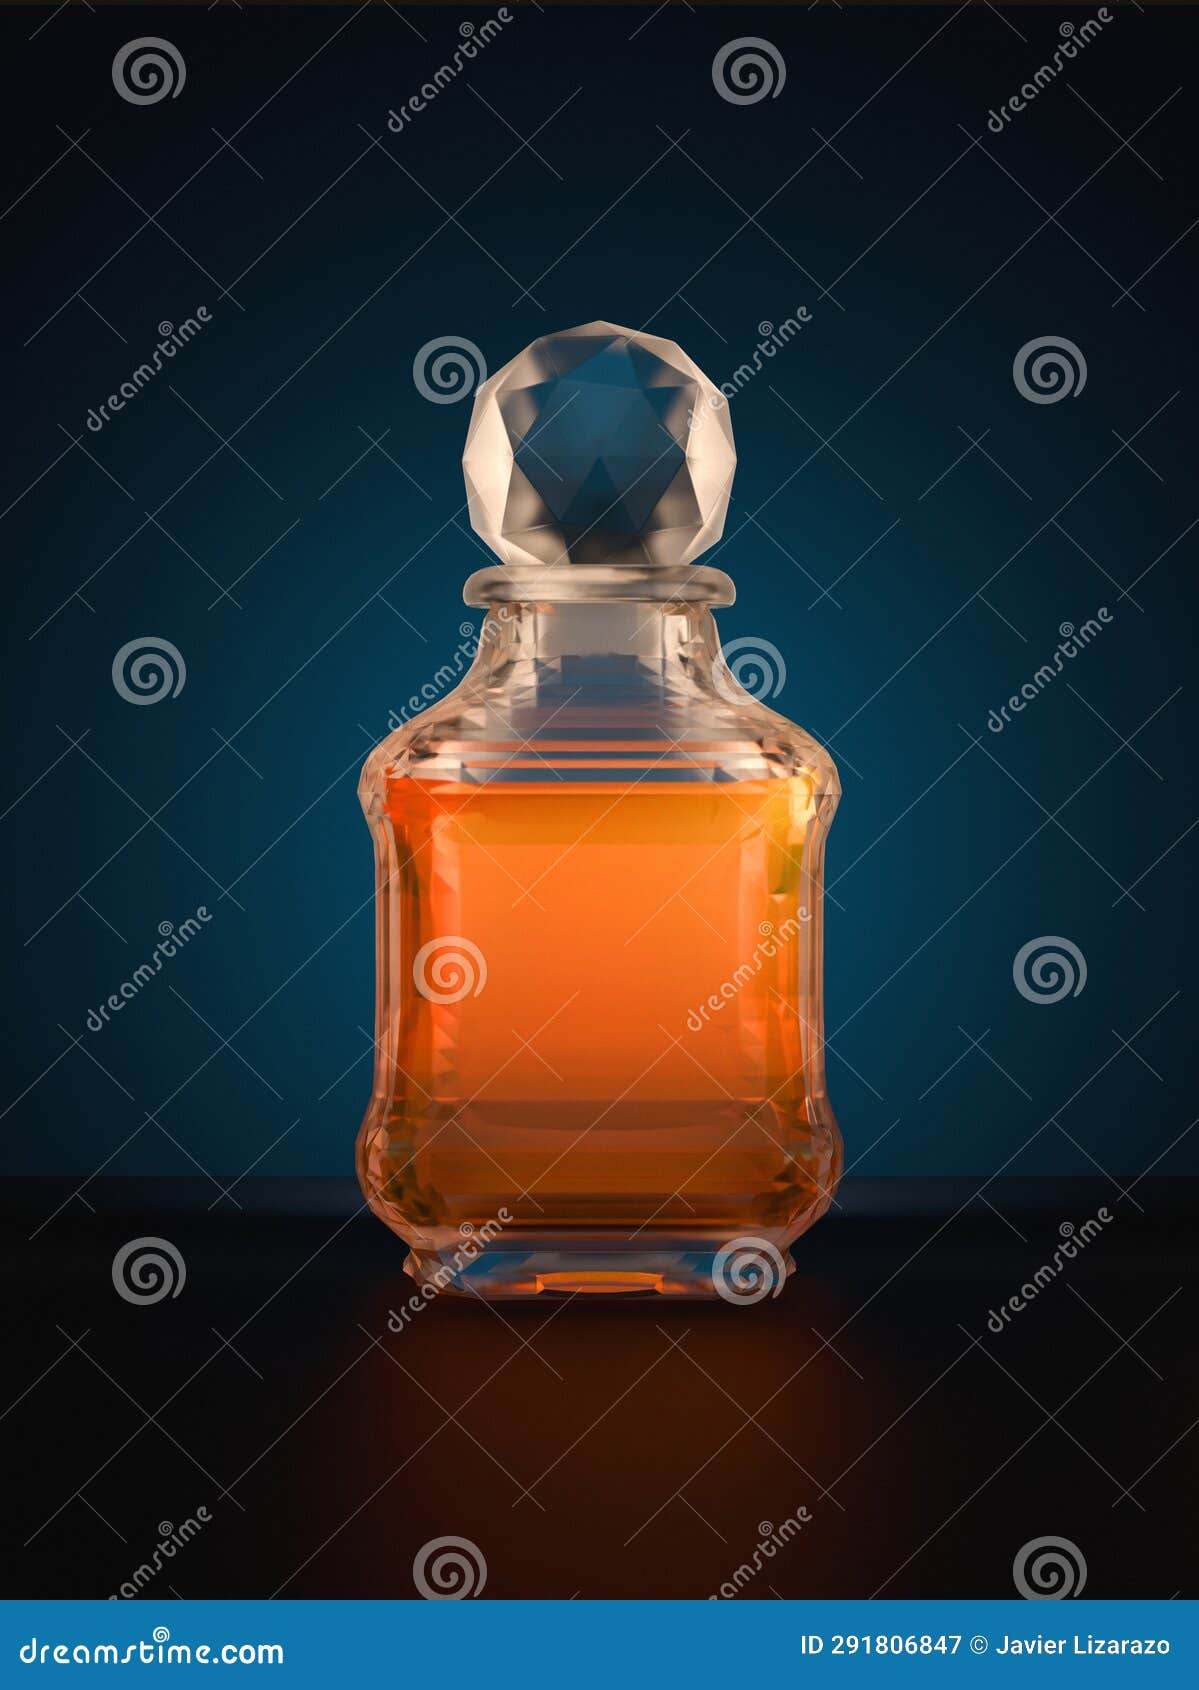 clear glass and yellow bottle for liquor, fragrance or potion